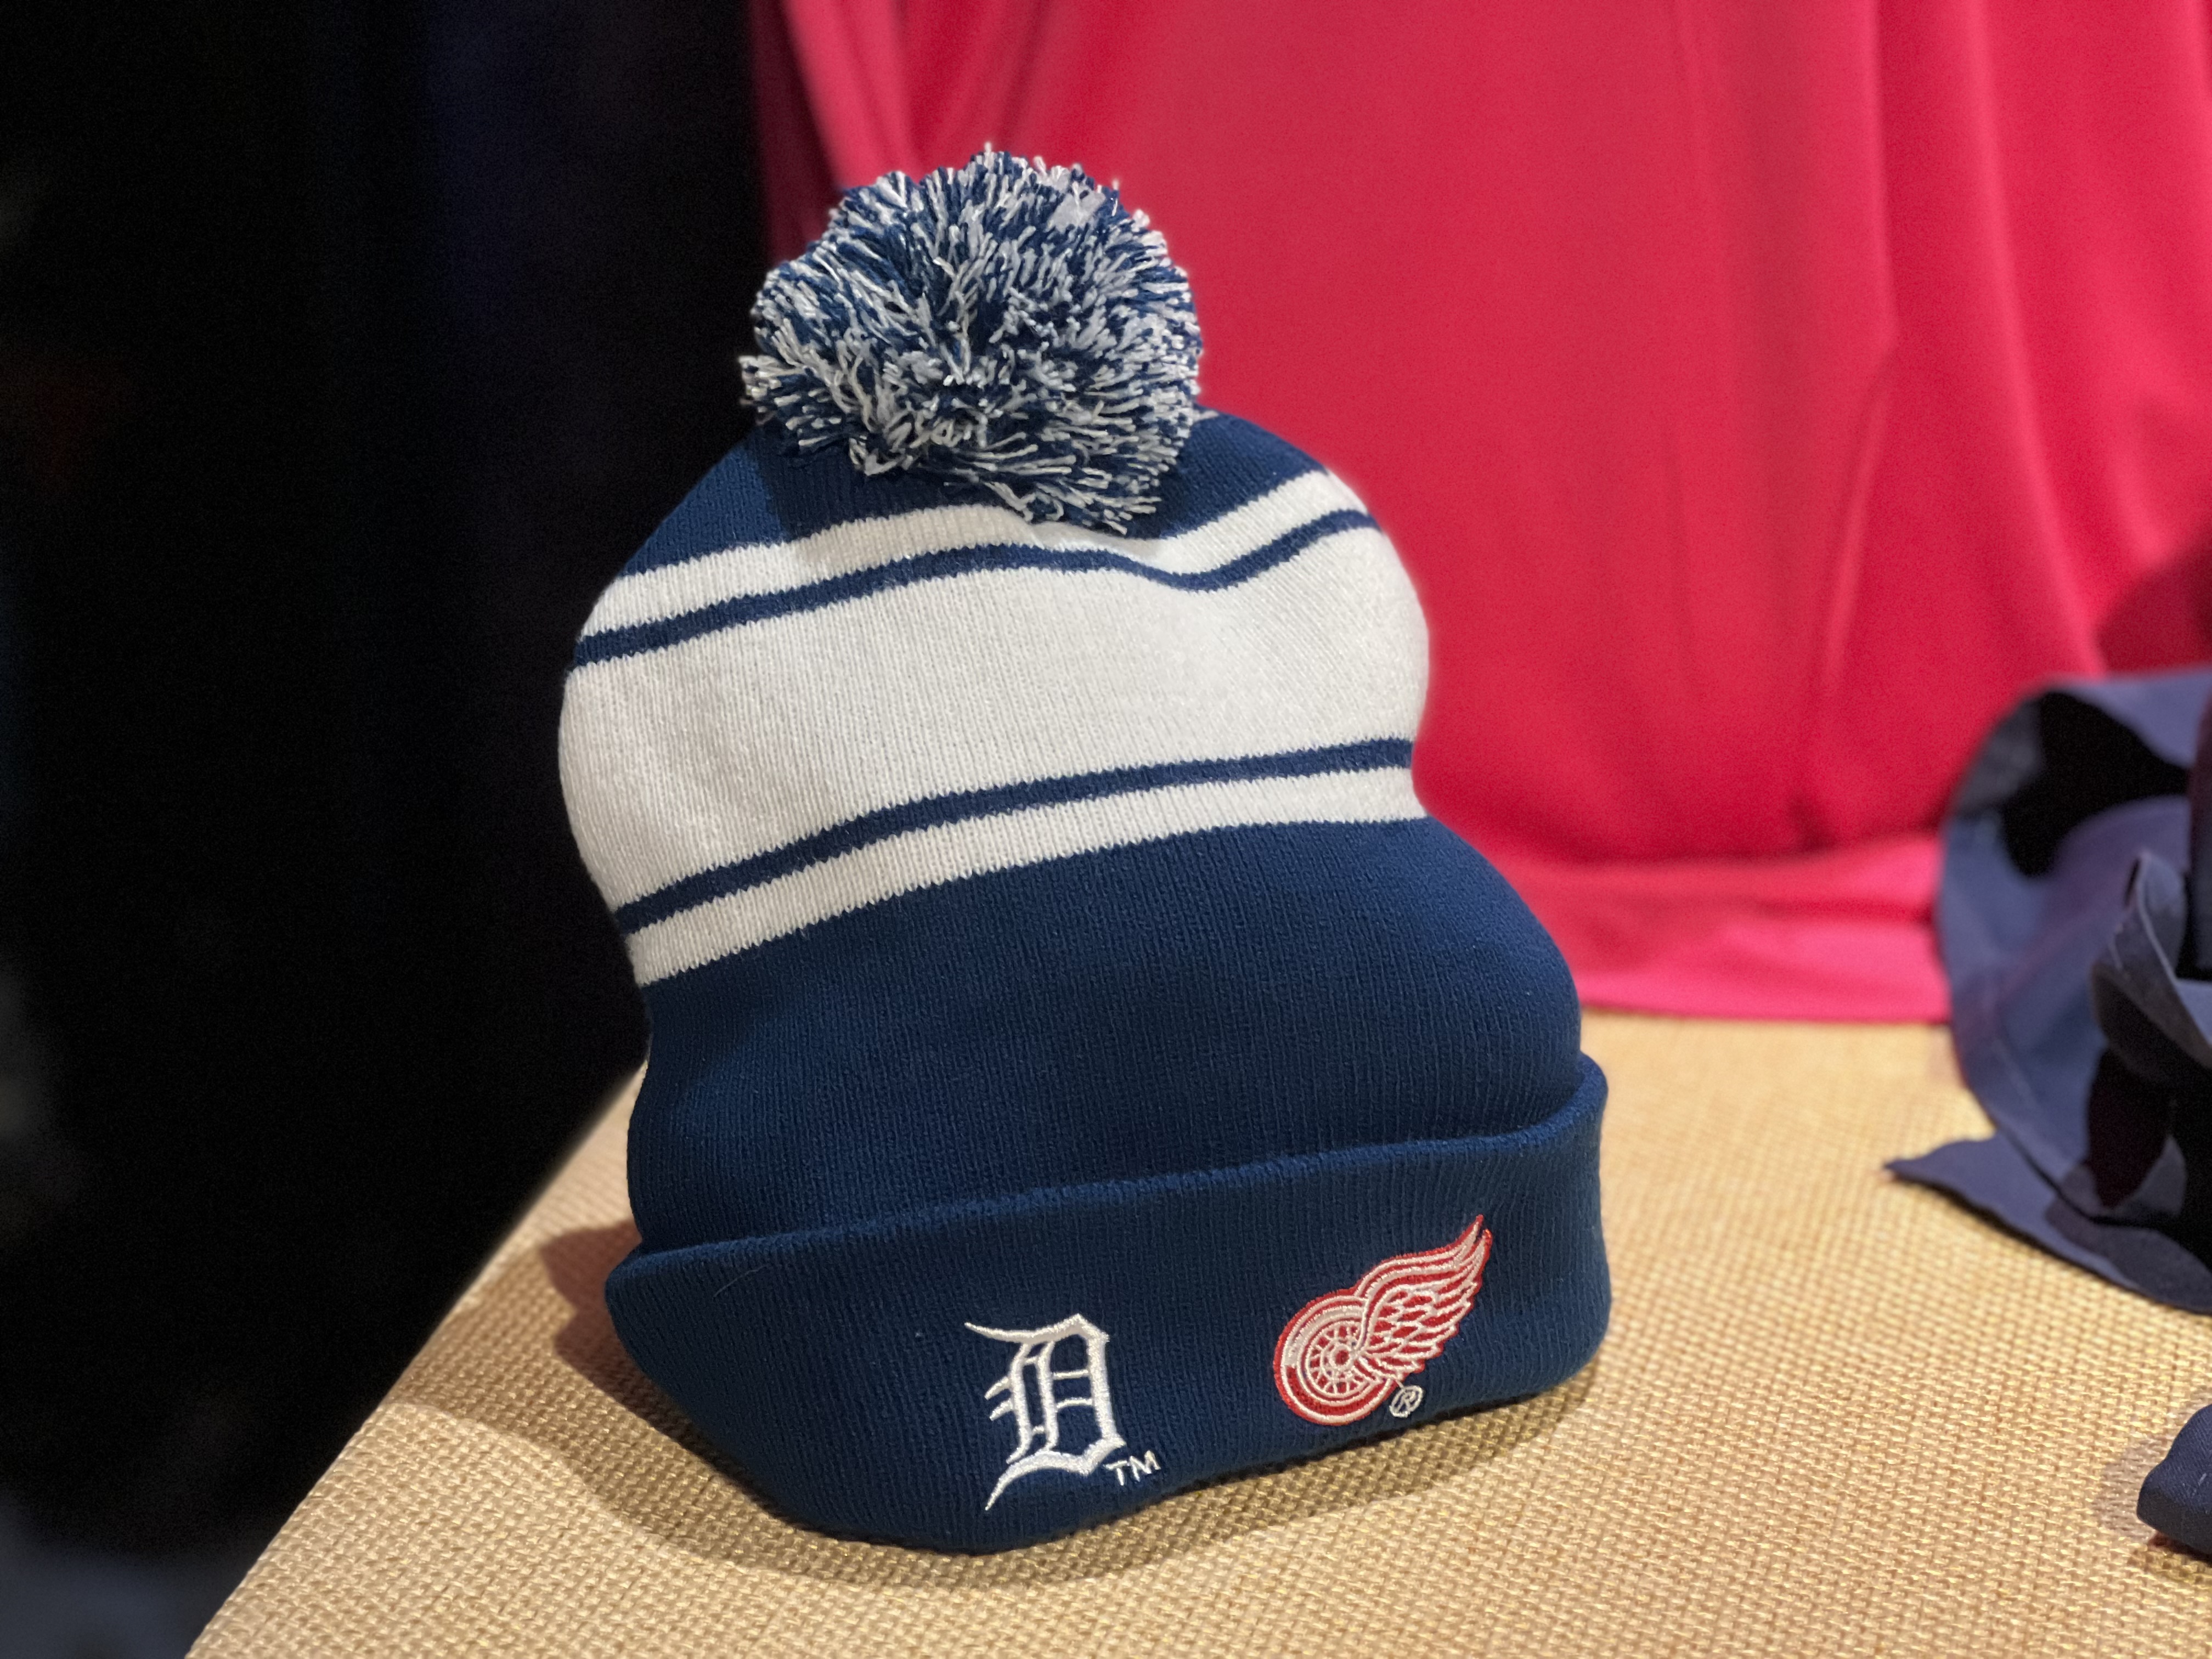 Detroit Tigers apparel and promotional items for 2023 